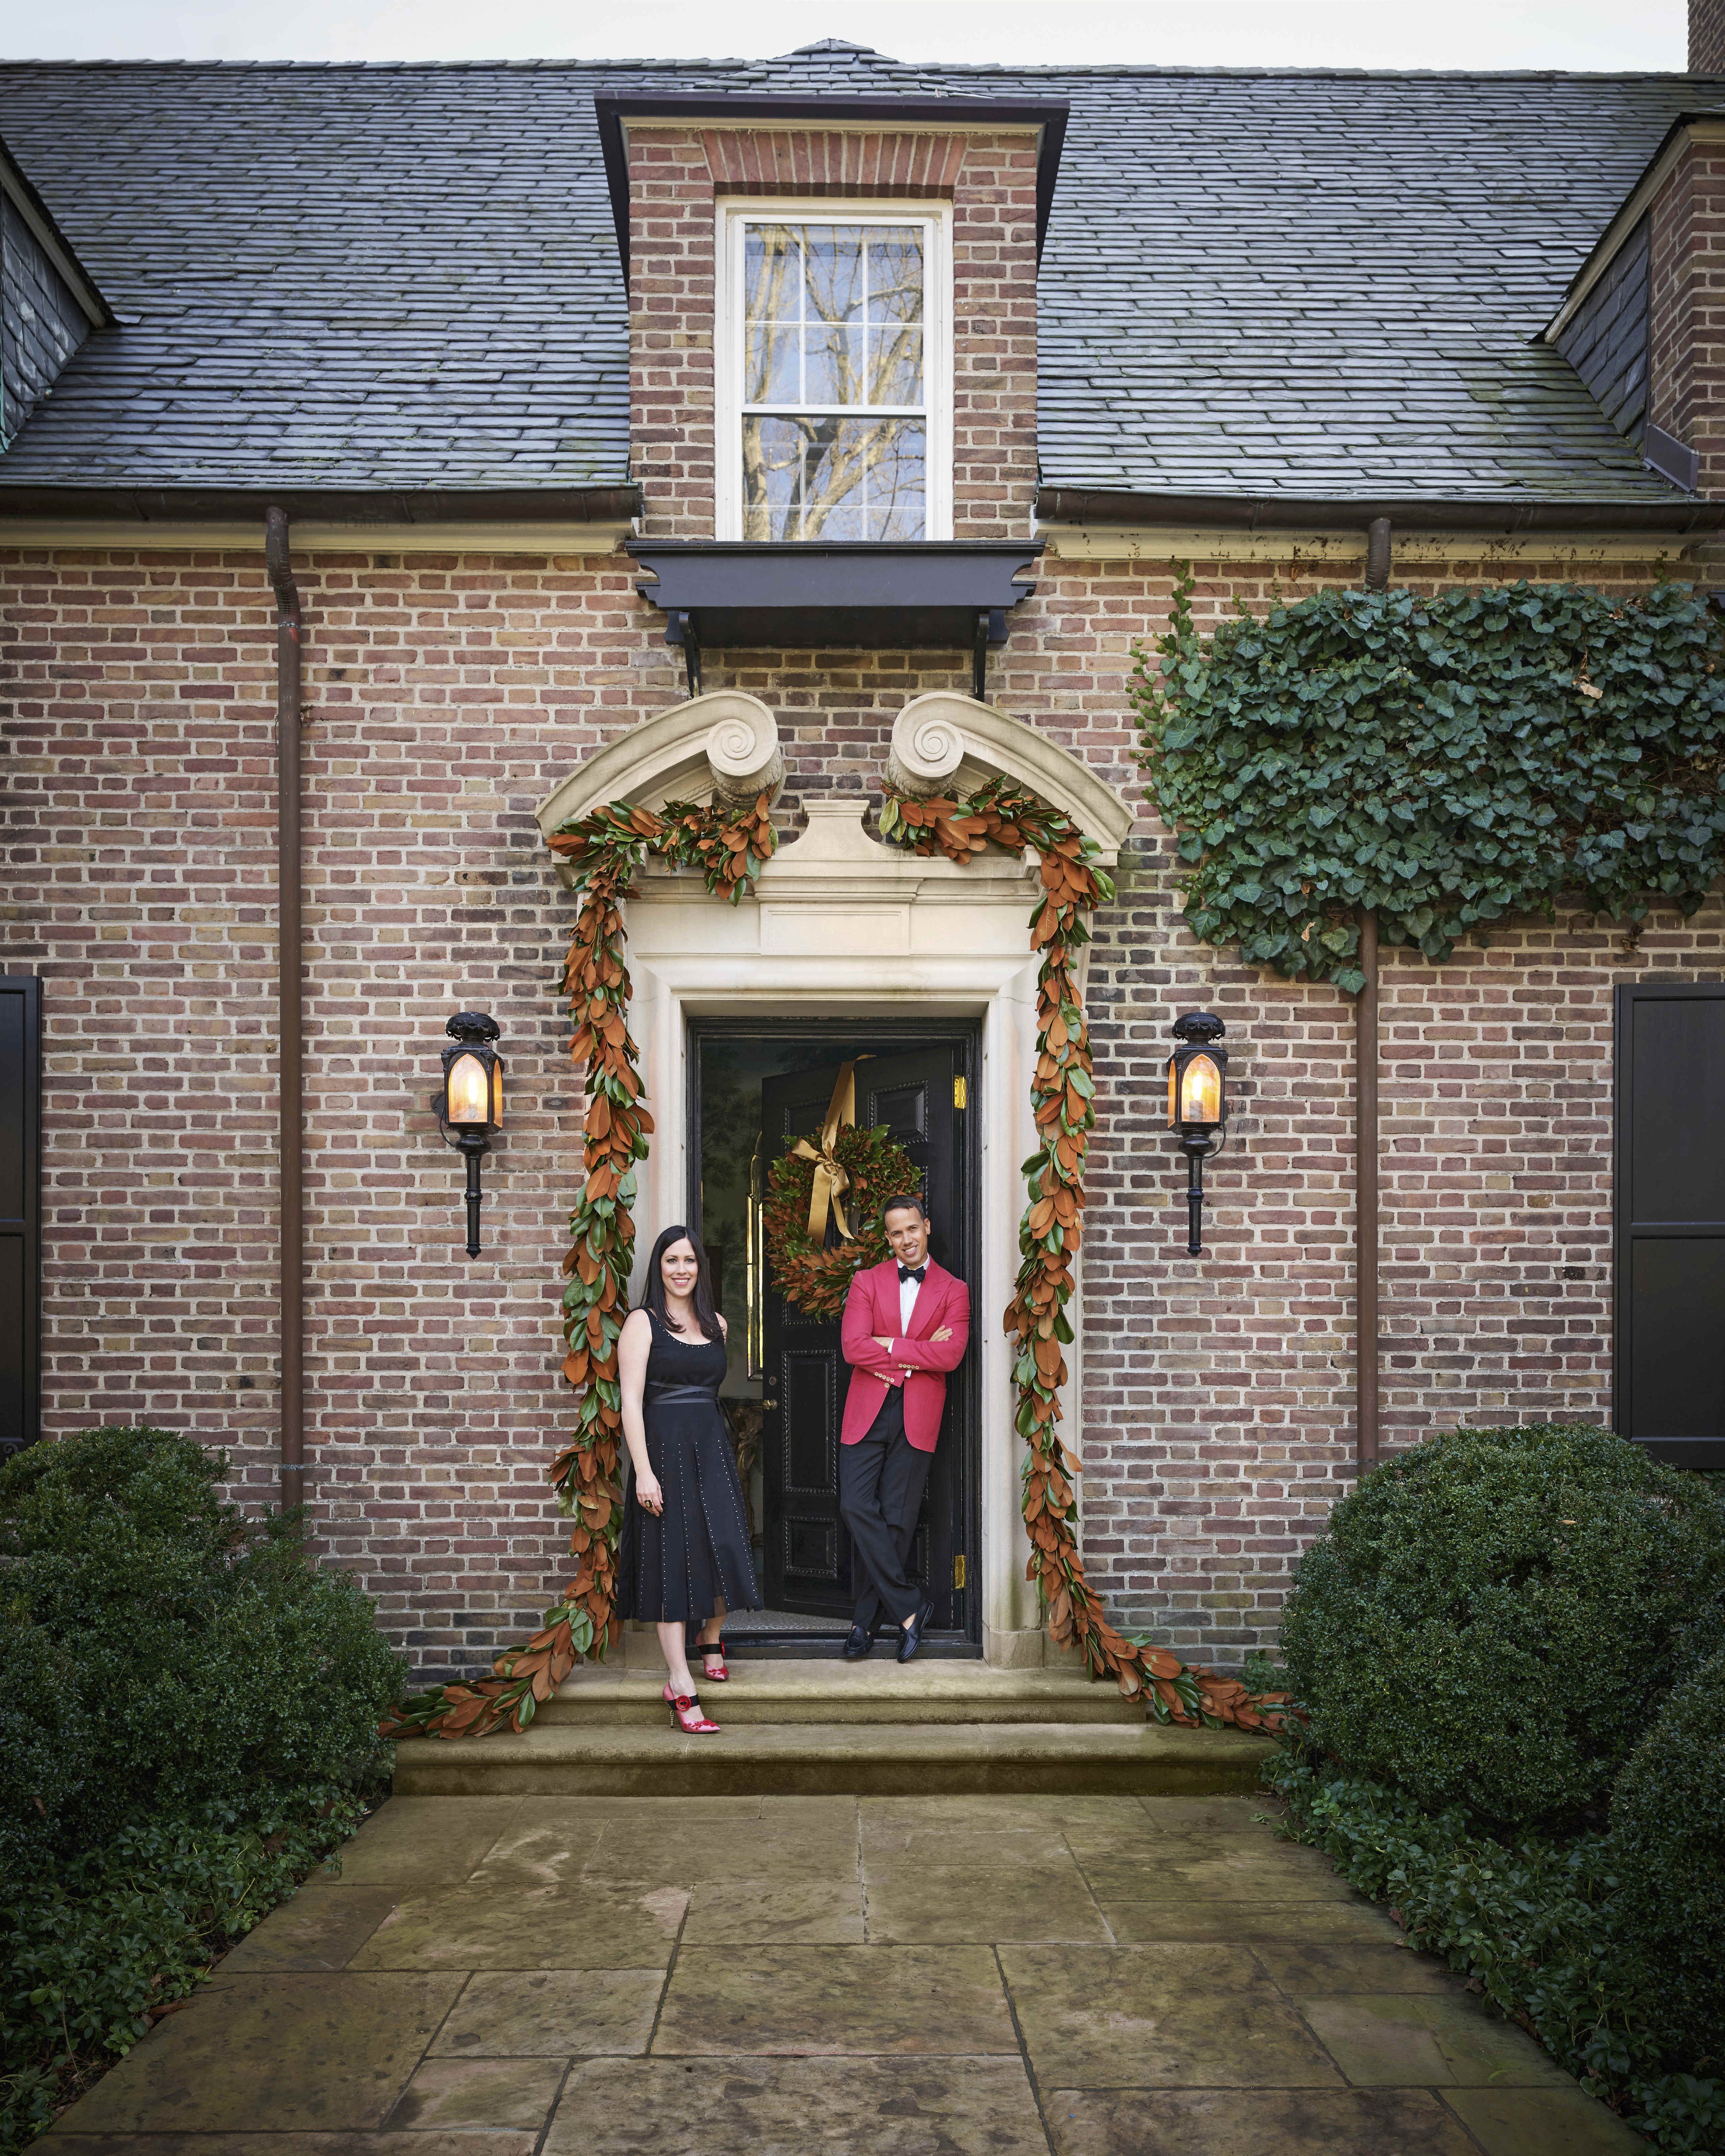 the brick exterior of a connecticut house with a man and woman standing at the front door